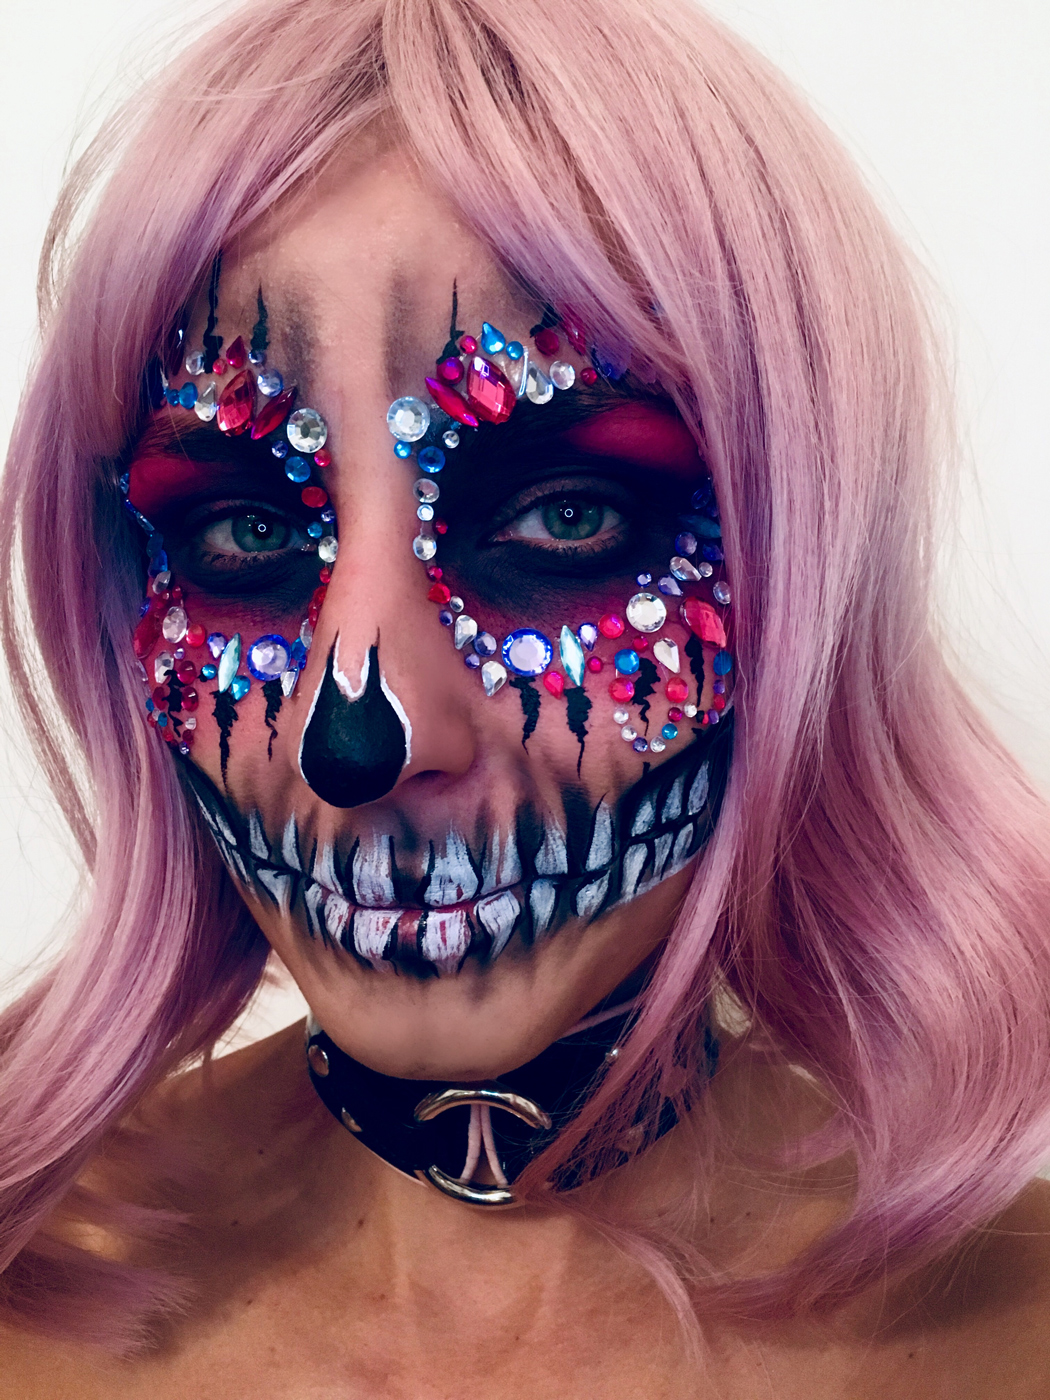  Halloween  Makeup  Special  Effects  by Maya Lewis London